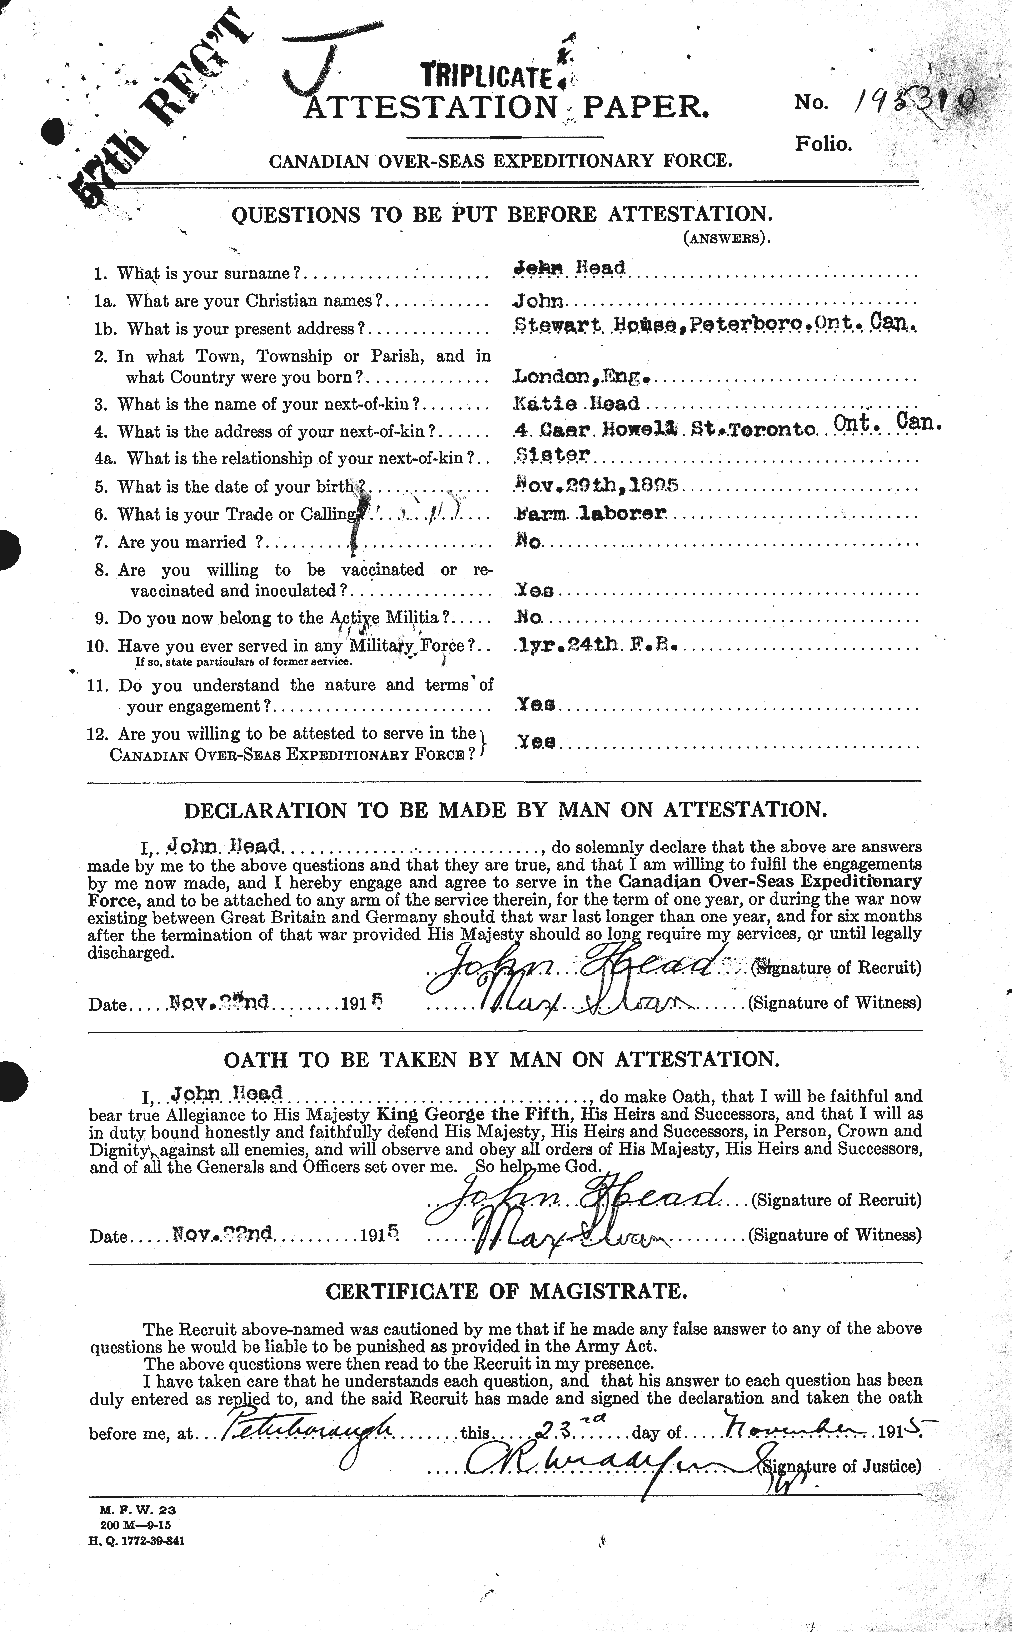 Personnel Records of the First World War - CEF 382120a